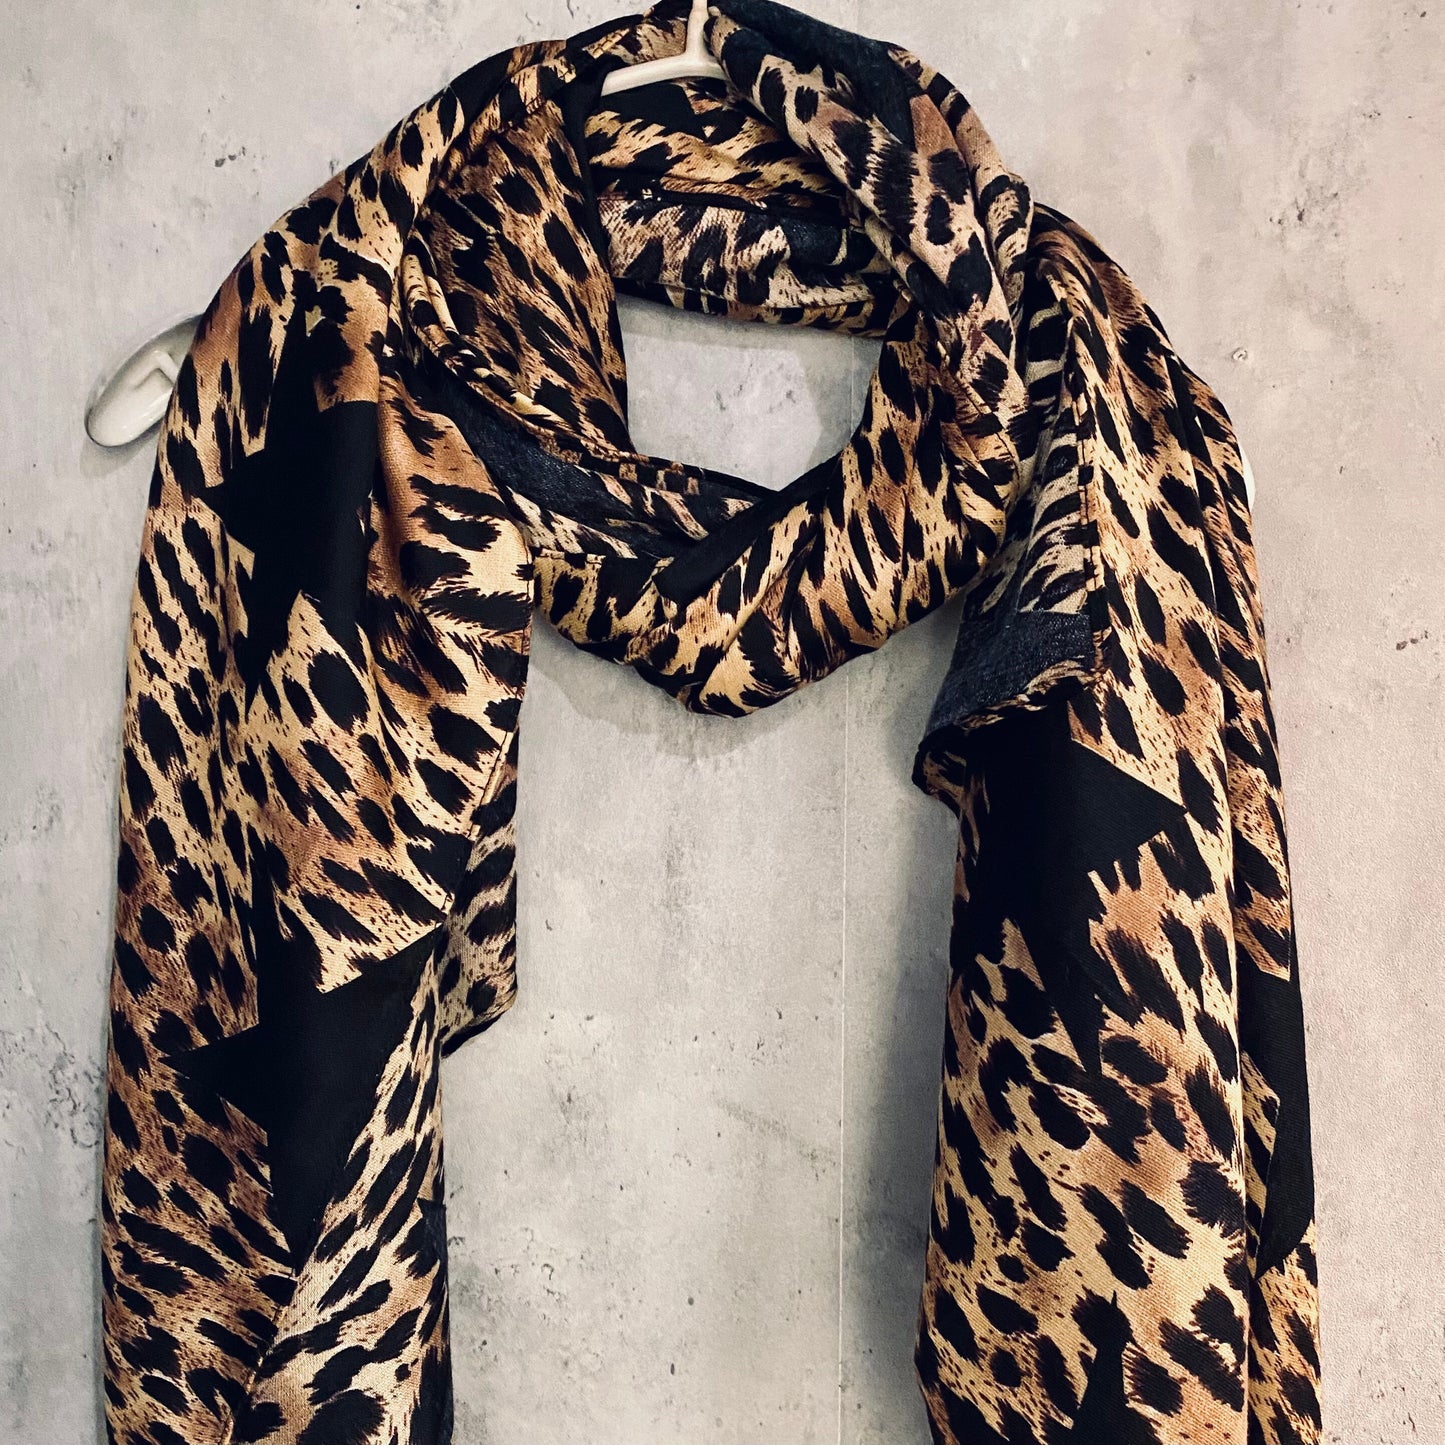 Leopard With Star Pattern Brown Cotton Scarf/Summer Autumn Scarf/Gifts For Mom/Gifts For Her Birthday Christmas/UK Seller/Scarf Women